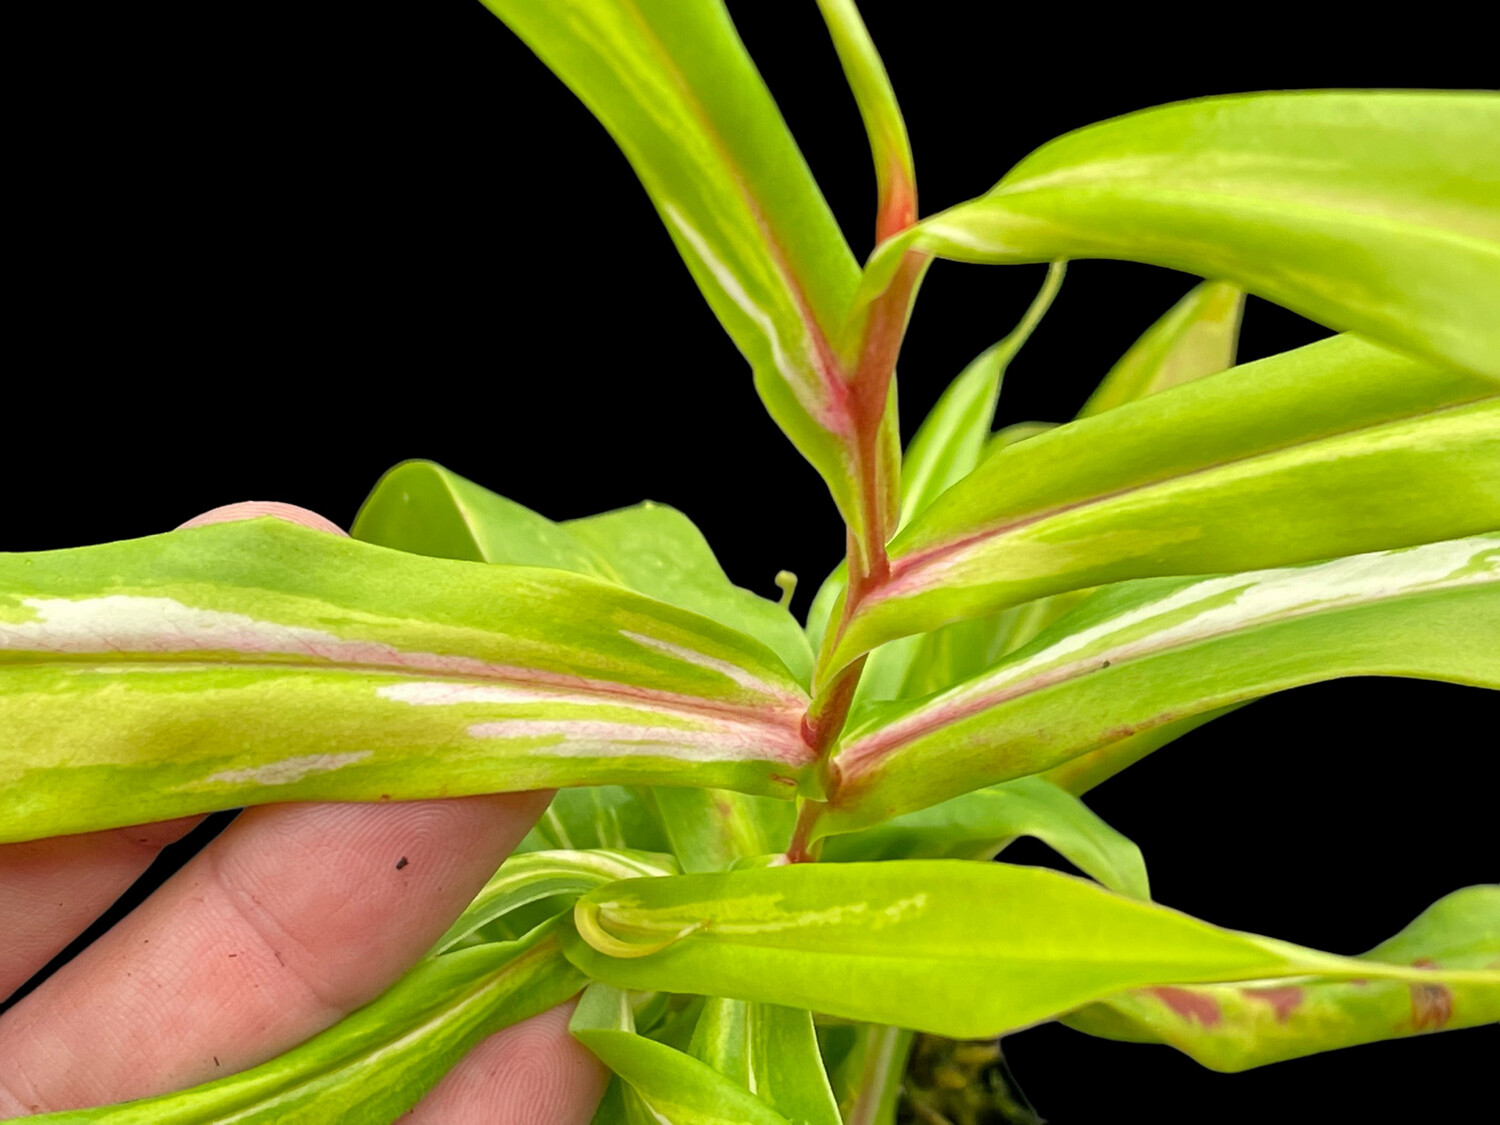 Nepenthes gracilis variegated - Rooted Cutting -WYSIWYG 